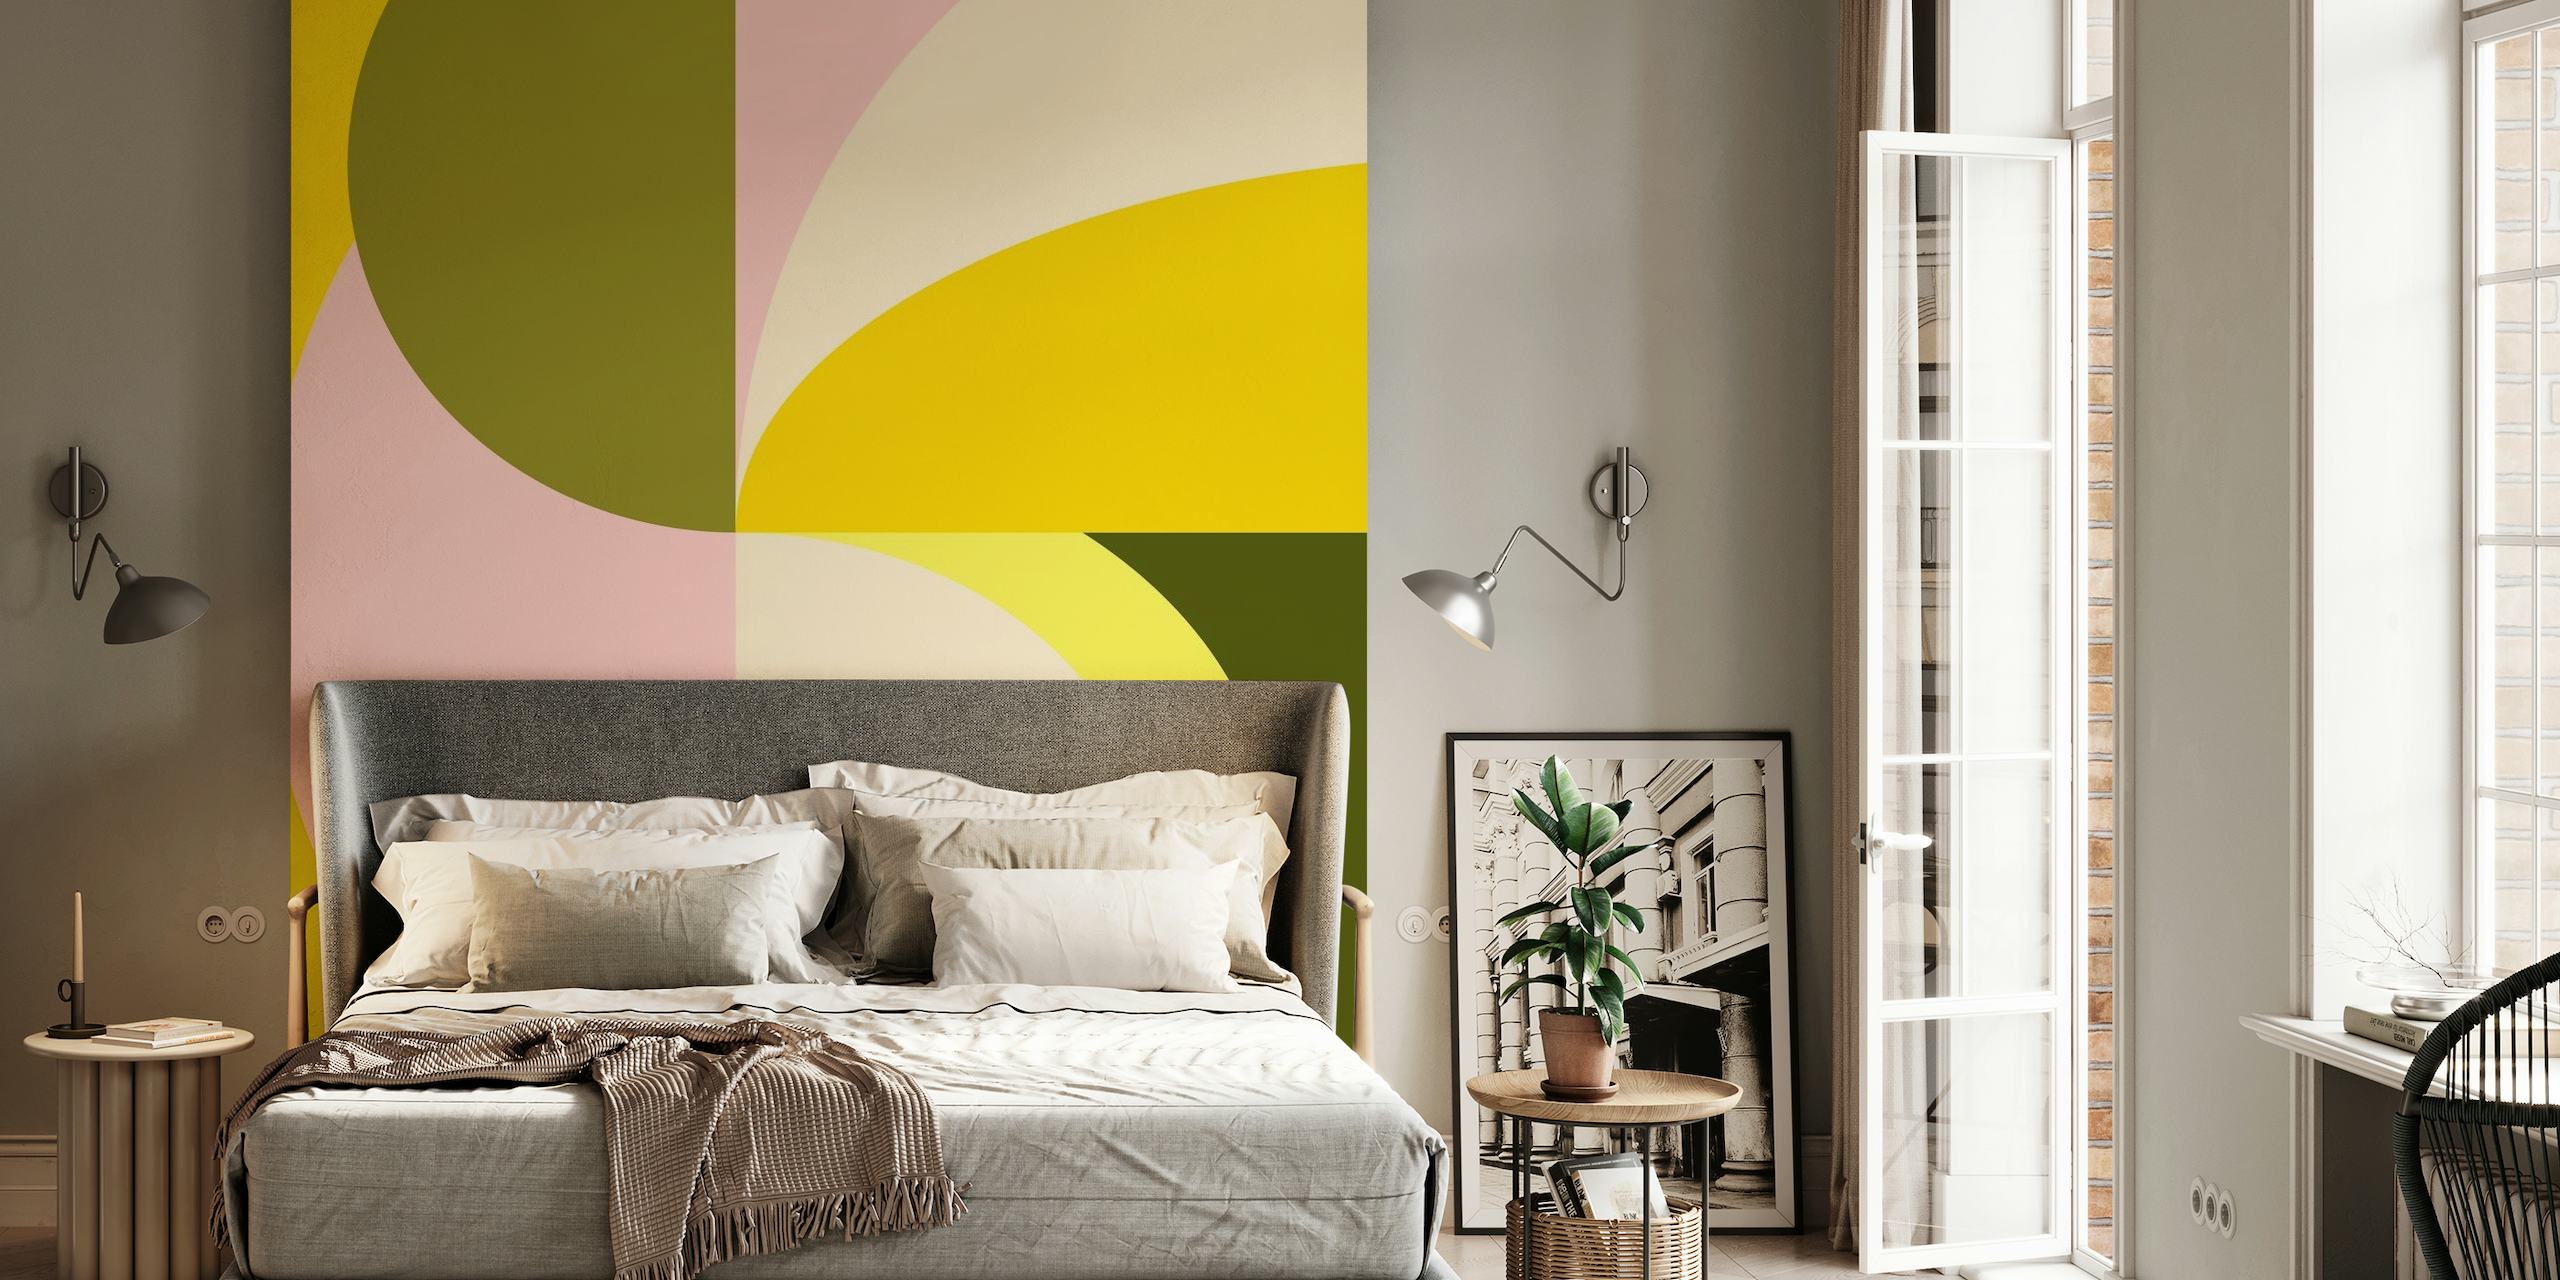 Abstract geometric shapes wall mural with citrus colors including yellow, pink, and green tones